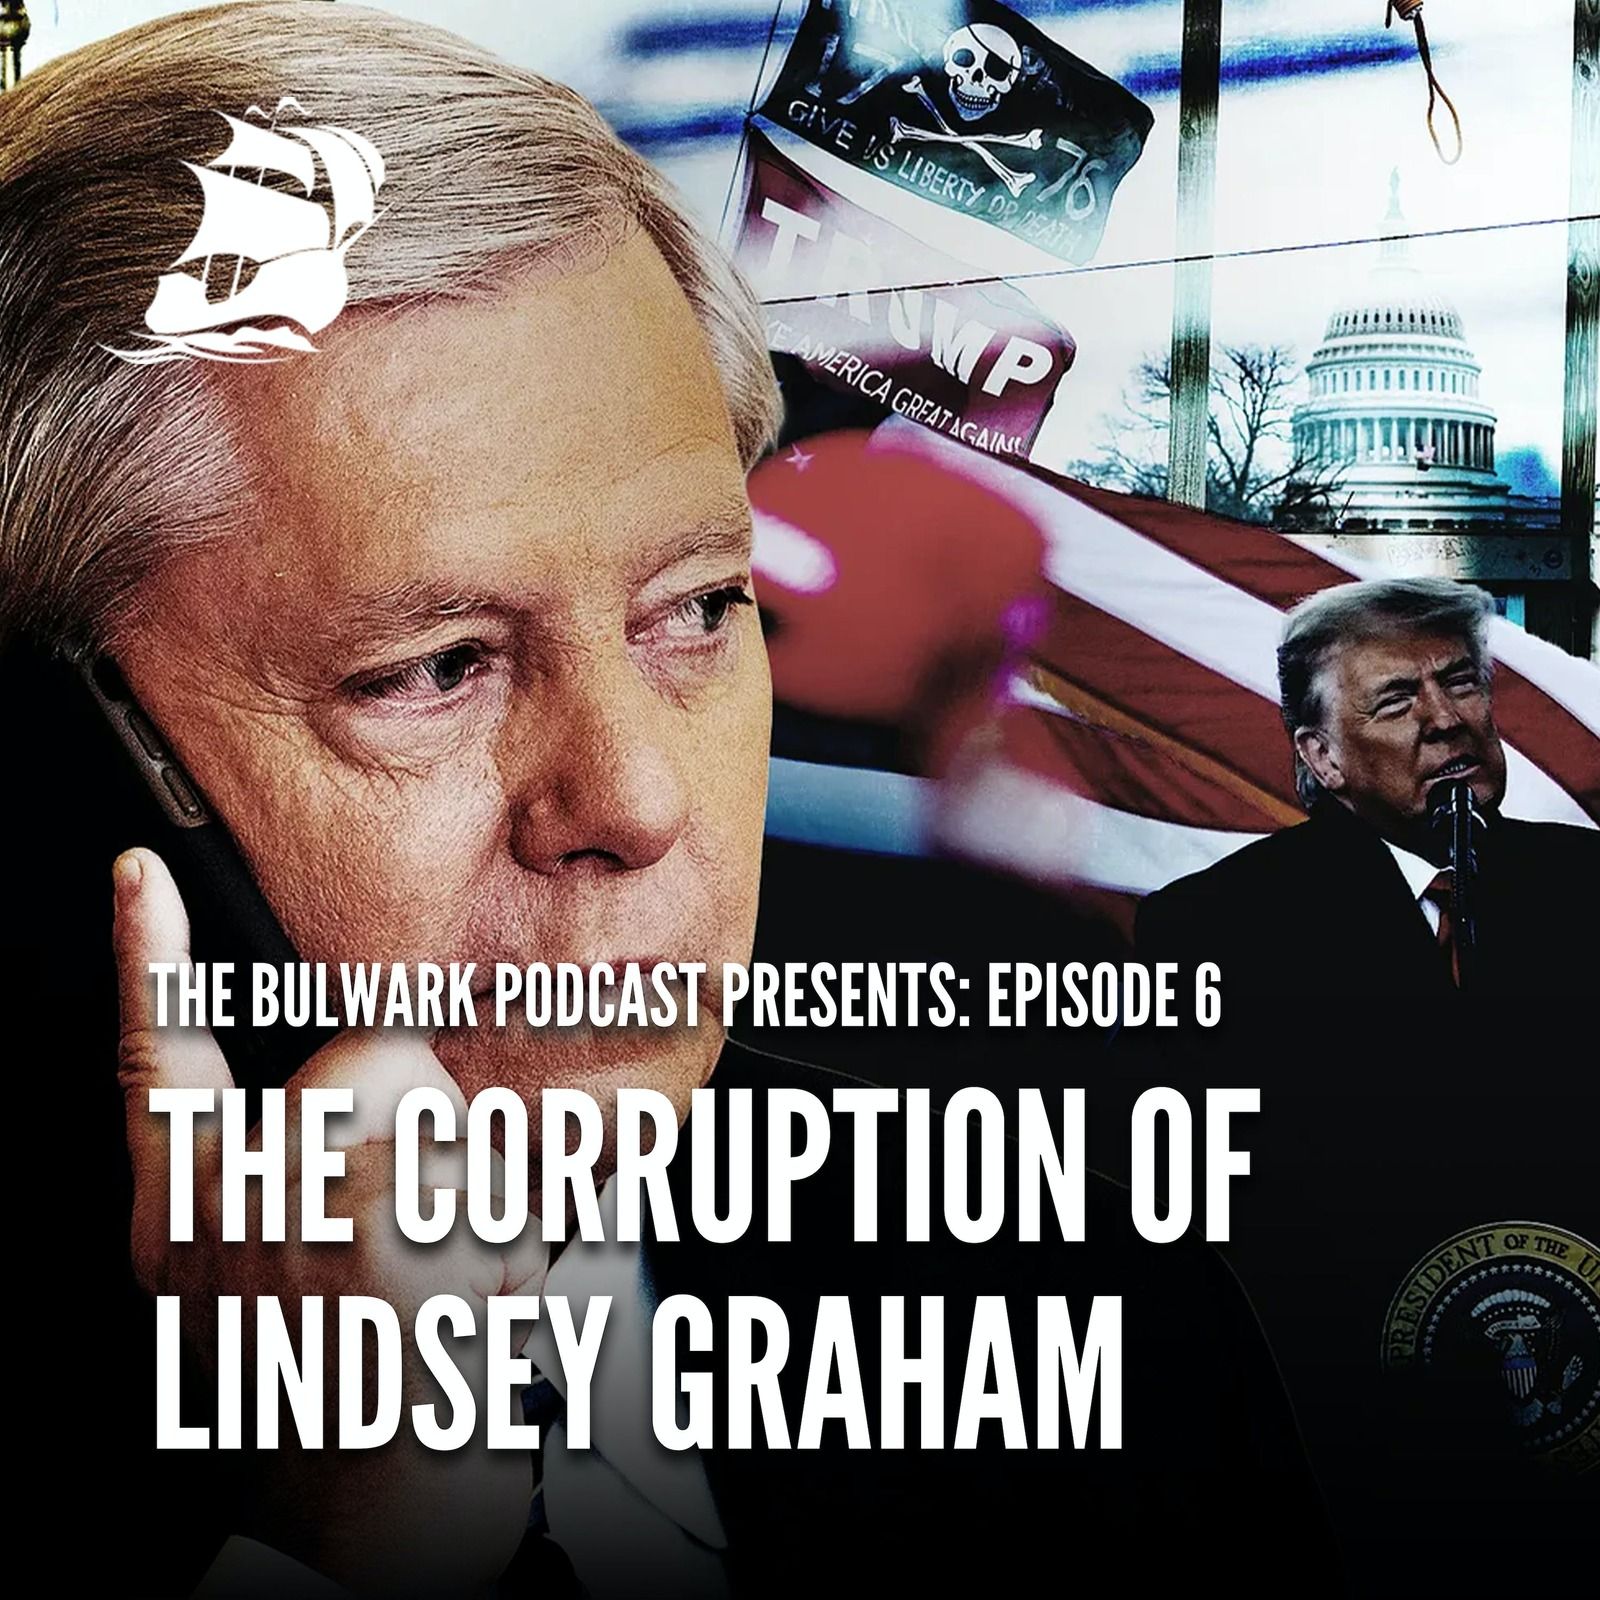 Ep. 6: The Corruption of Lindsey Graham by The Bulwark Podcast